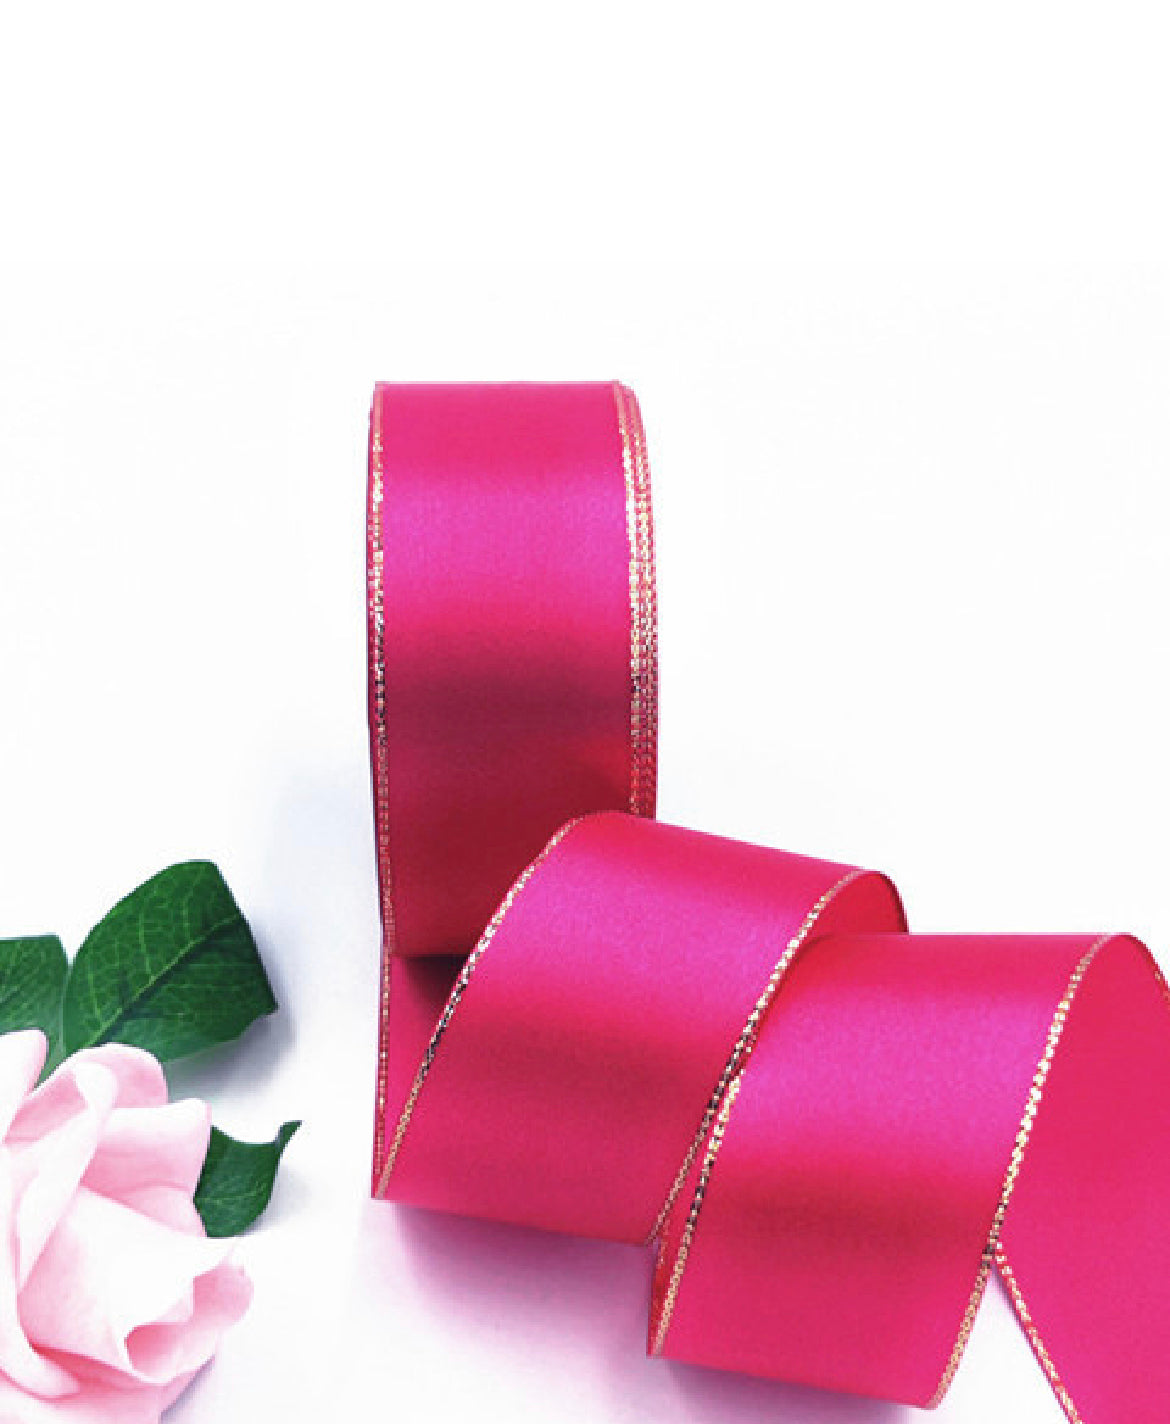 6 Handmade Ribbon Flowers 2-1/2 Inches Over 150 Colors to Choose MY-873  Ready to Ship 